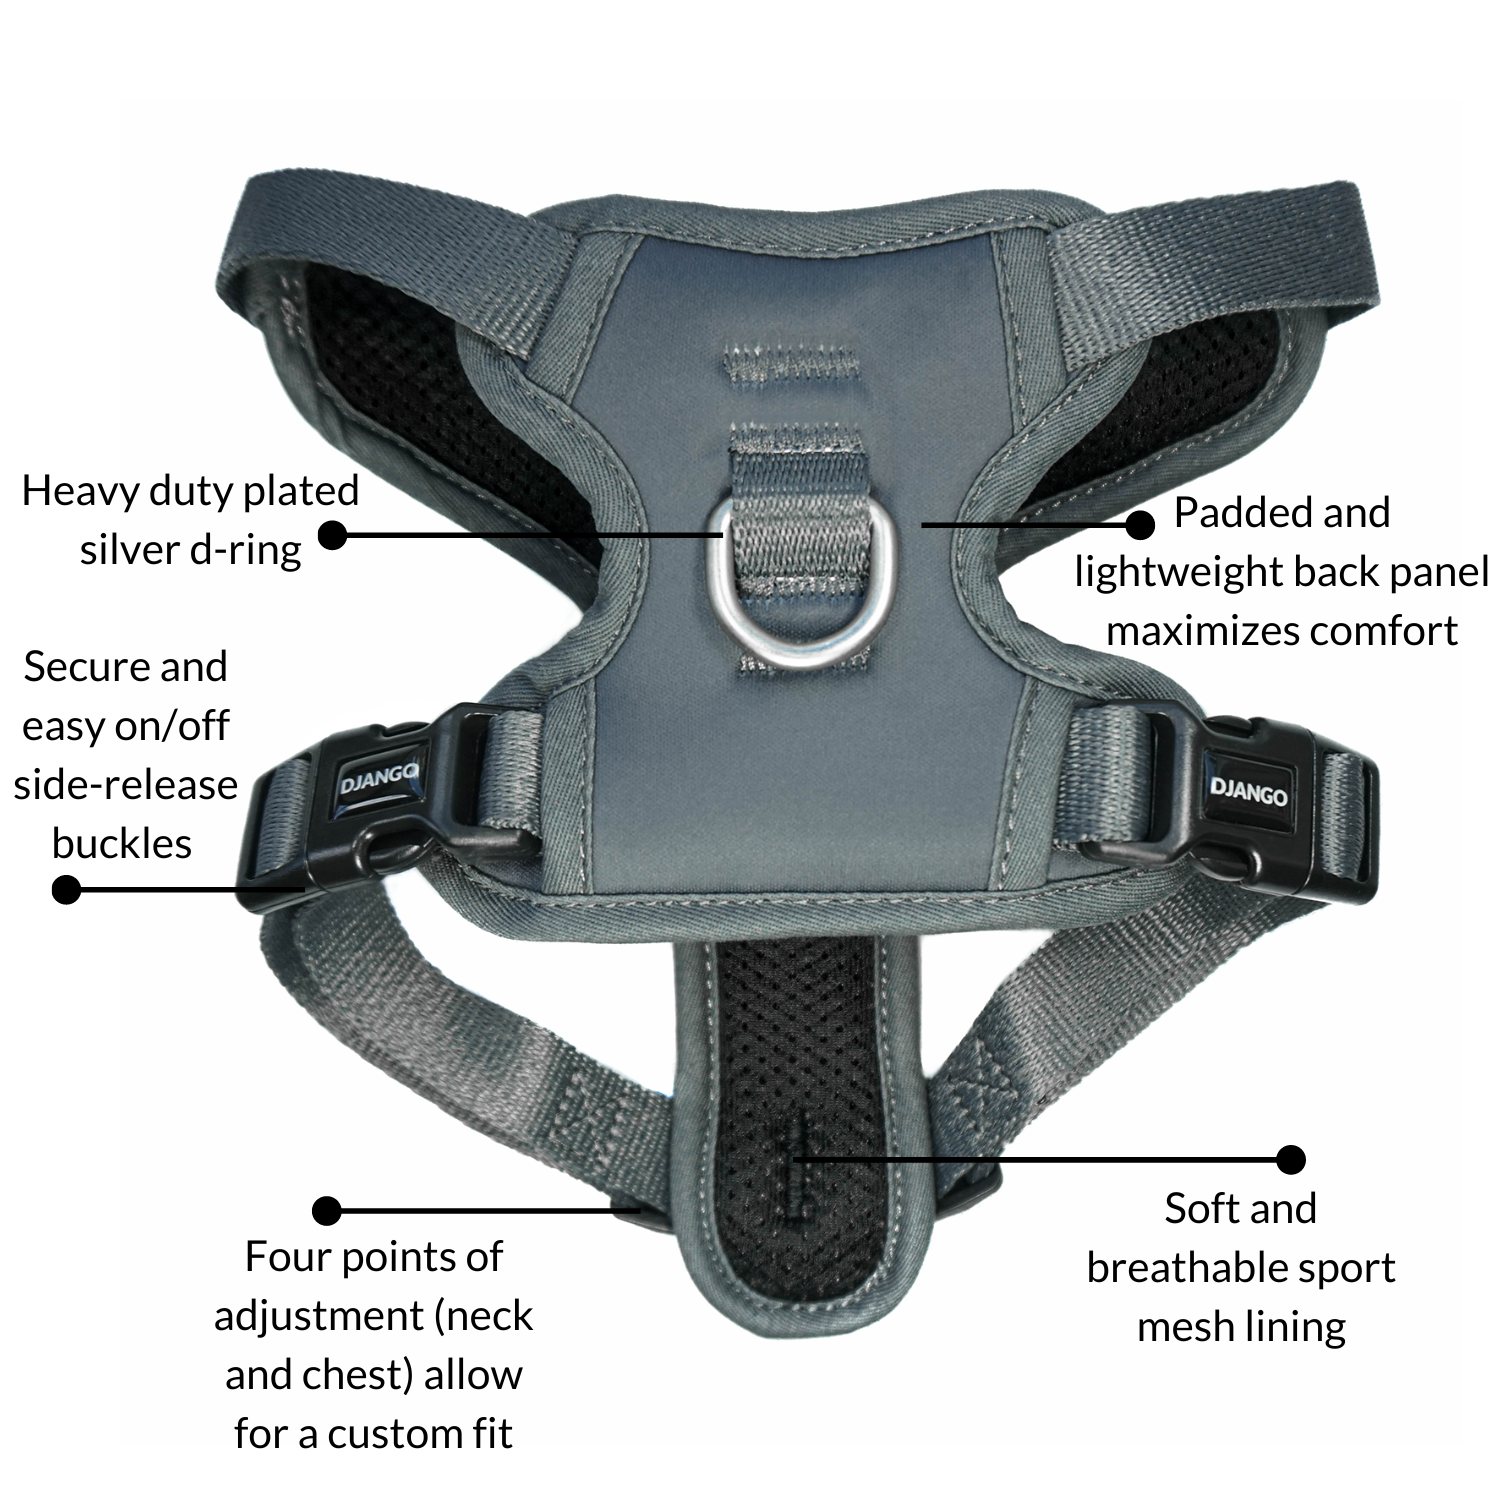 DJANGO Tahoe No Pull Dog Harness in Poppy Seed Gray - Additional features include a padded and lightweight back panel for added comfort, soft and breathable mesh lining, four points of adjustment, secure and easy on/off buckles, and heavy duty plated silver hardware. - djangobrand.com